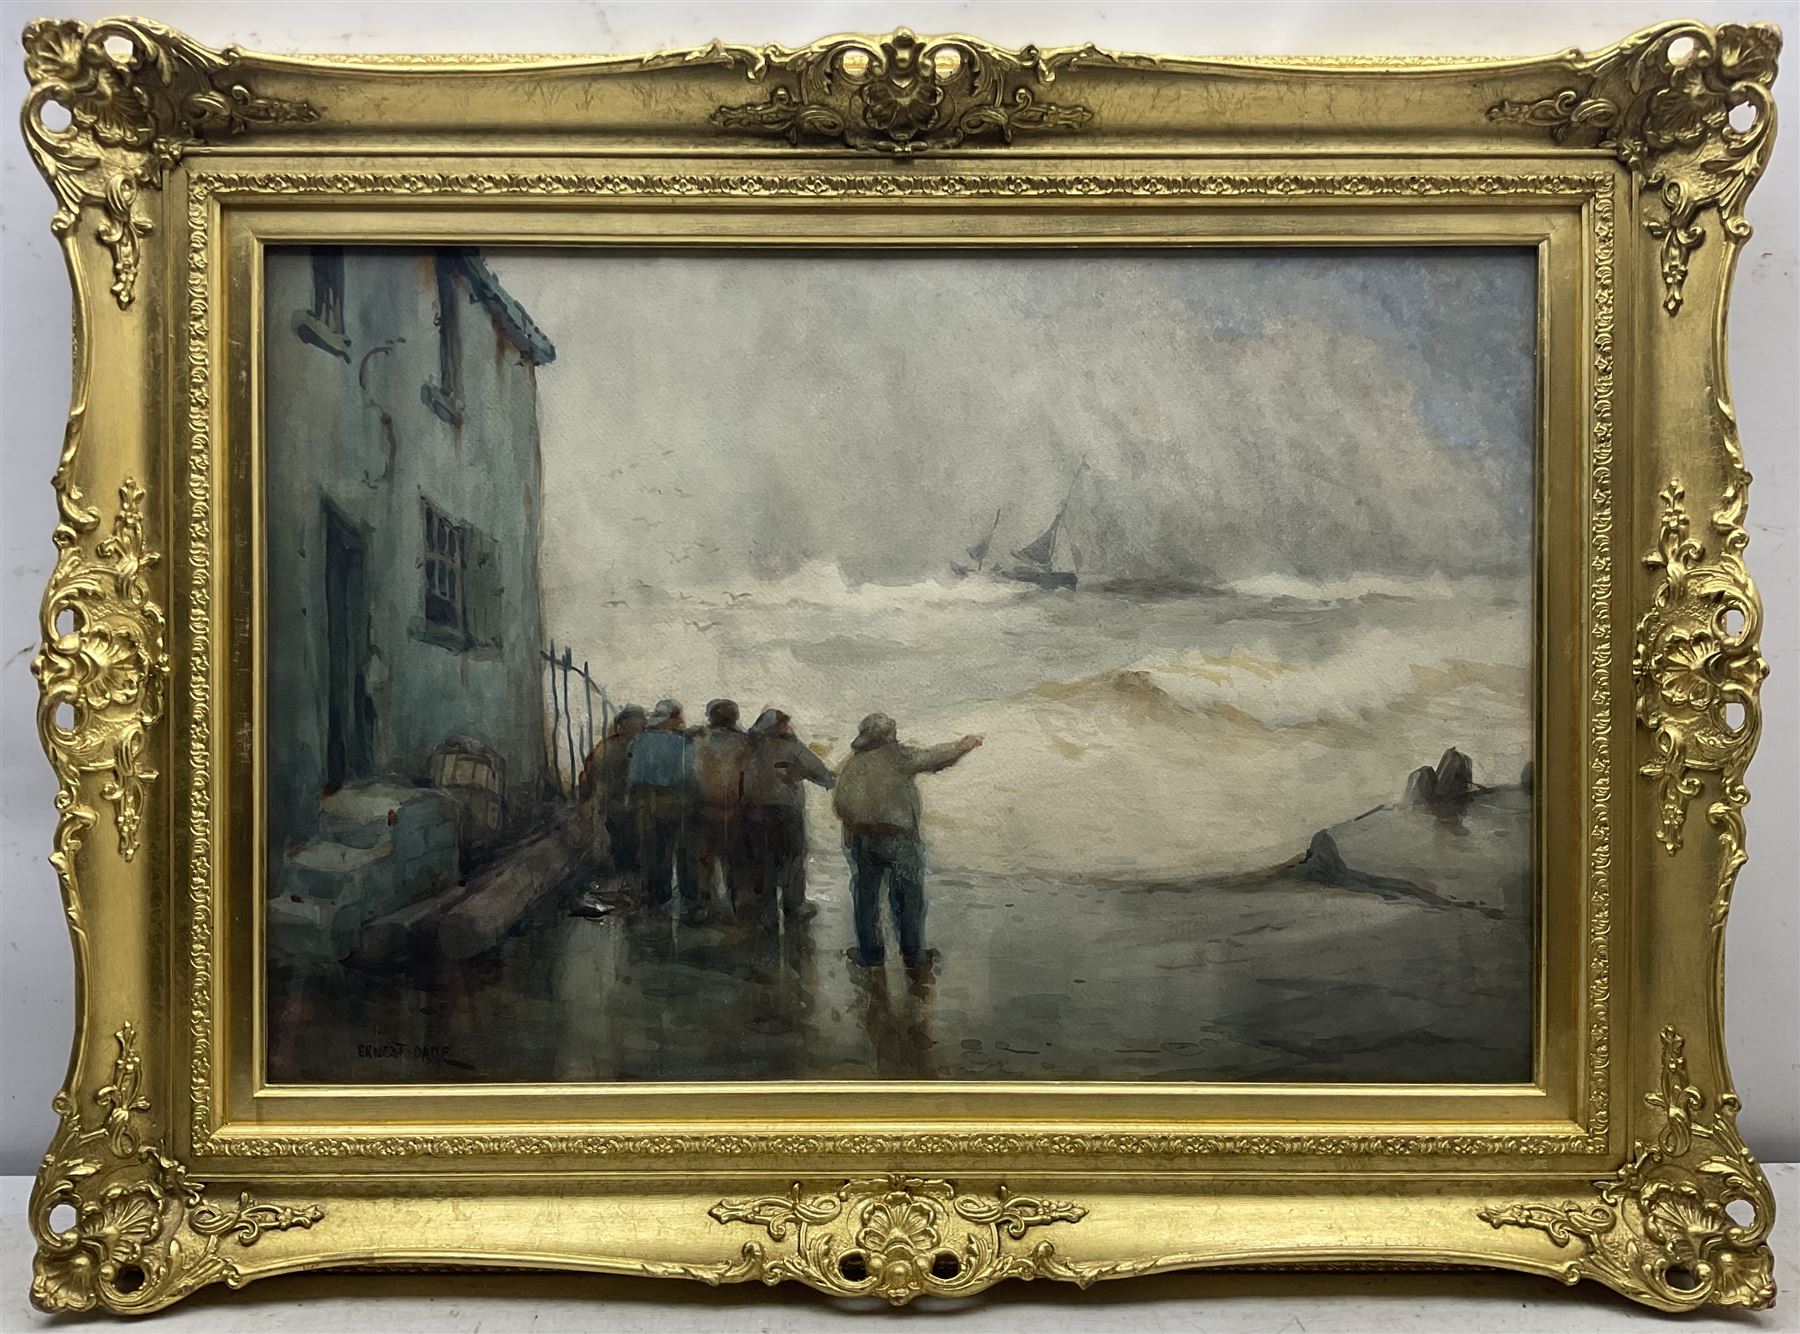 Ernest Dade (Staithes Group 1864-1935): 'Ashore' - Fishermen beside the Old Cod and Lobster Staithes - Image 2 of 5